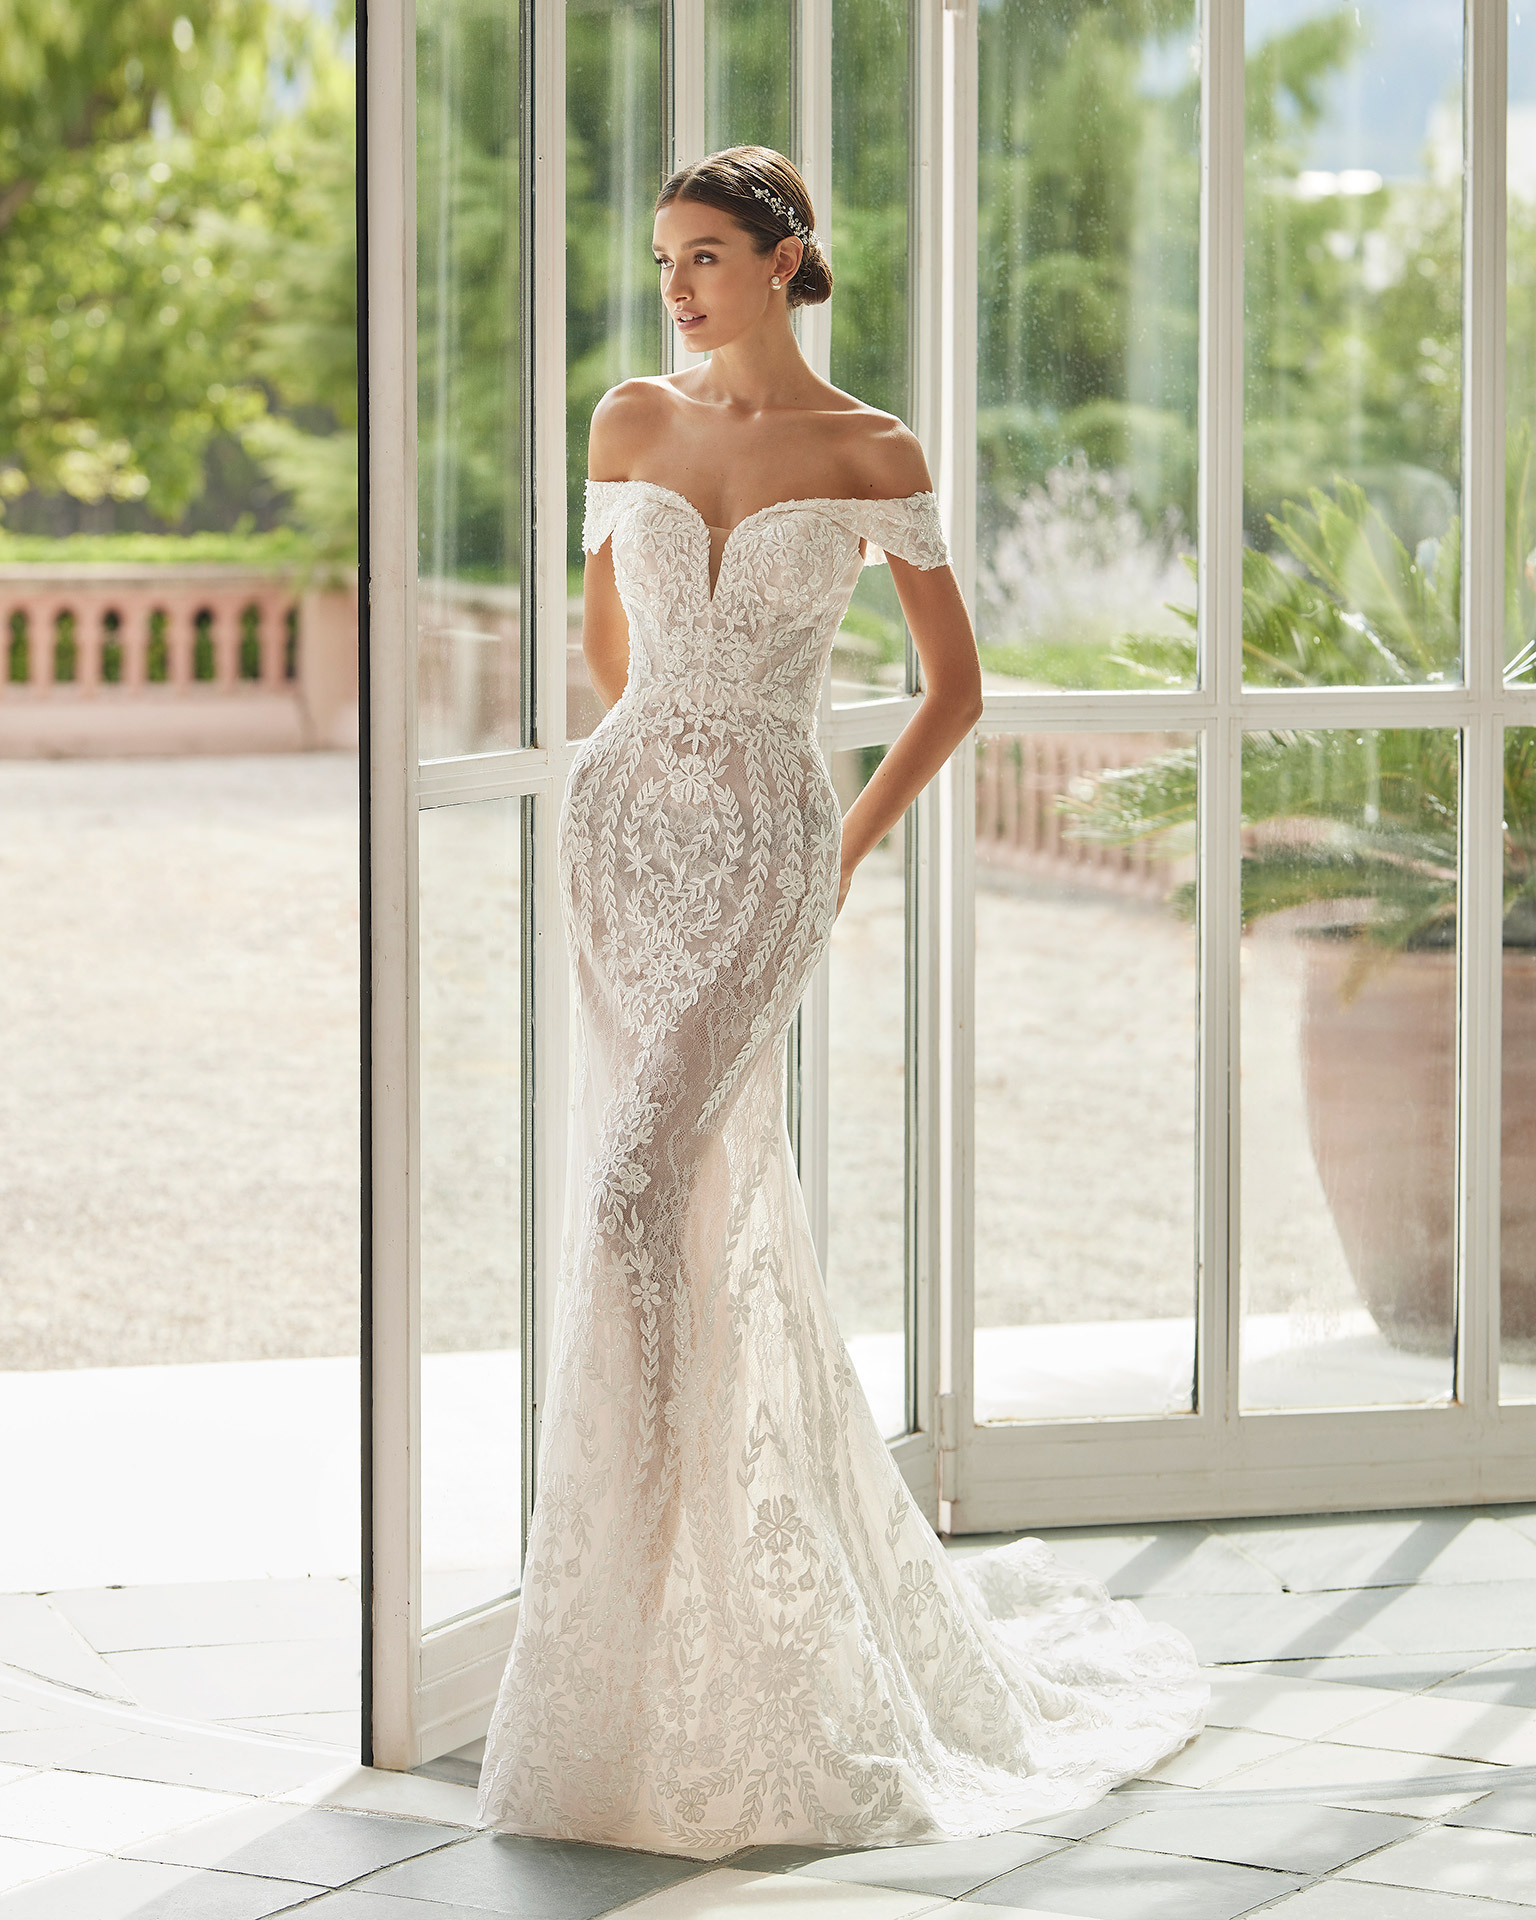 Two-piece mermaid-style wedding dress, with a Mikado overskirt and a central bow; with a sweetheart deep-plunge neckline, a corset back, and wrap sleeves. Unique Luna Studio outfit made of tulle, lace with beadwork, and Mikado. LUNA_NOVIAS.